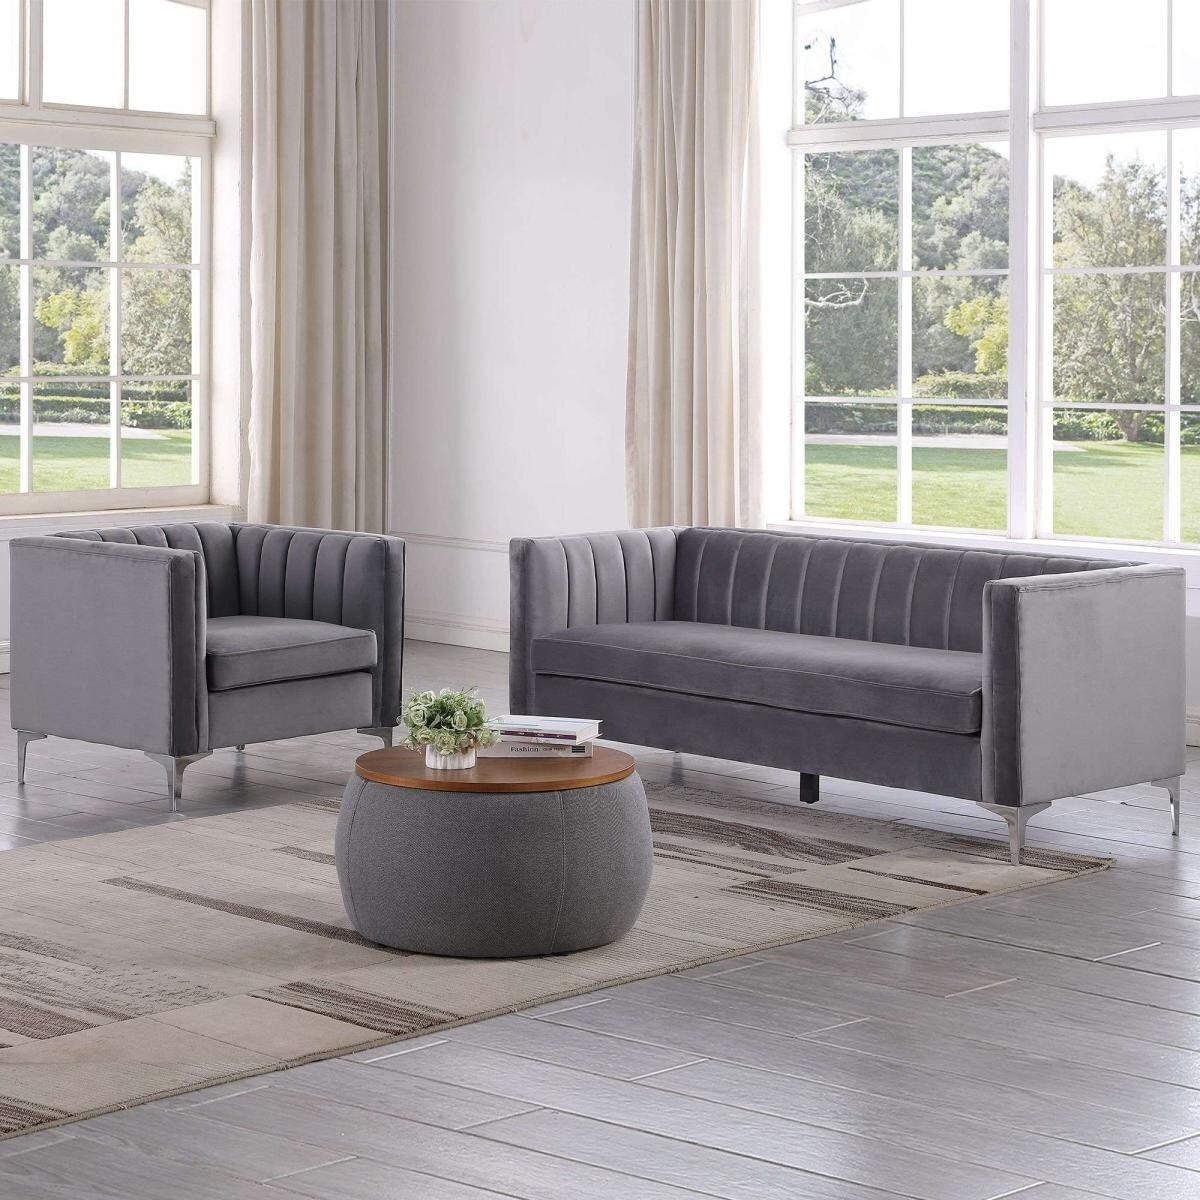 Morden Fort Living Room Furniture Sets Couches for Living Room, Chair,  Couch and Sofa 3 Pieces, Fabric, Dutch Velvet - Bed Bath & Beyond - 33909944